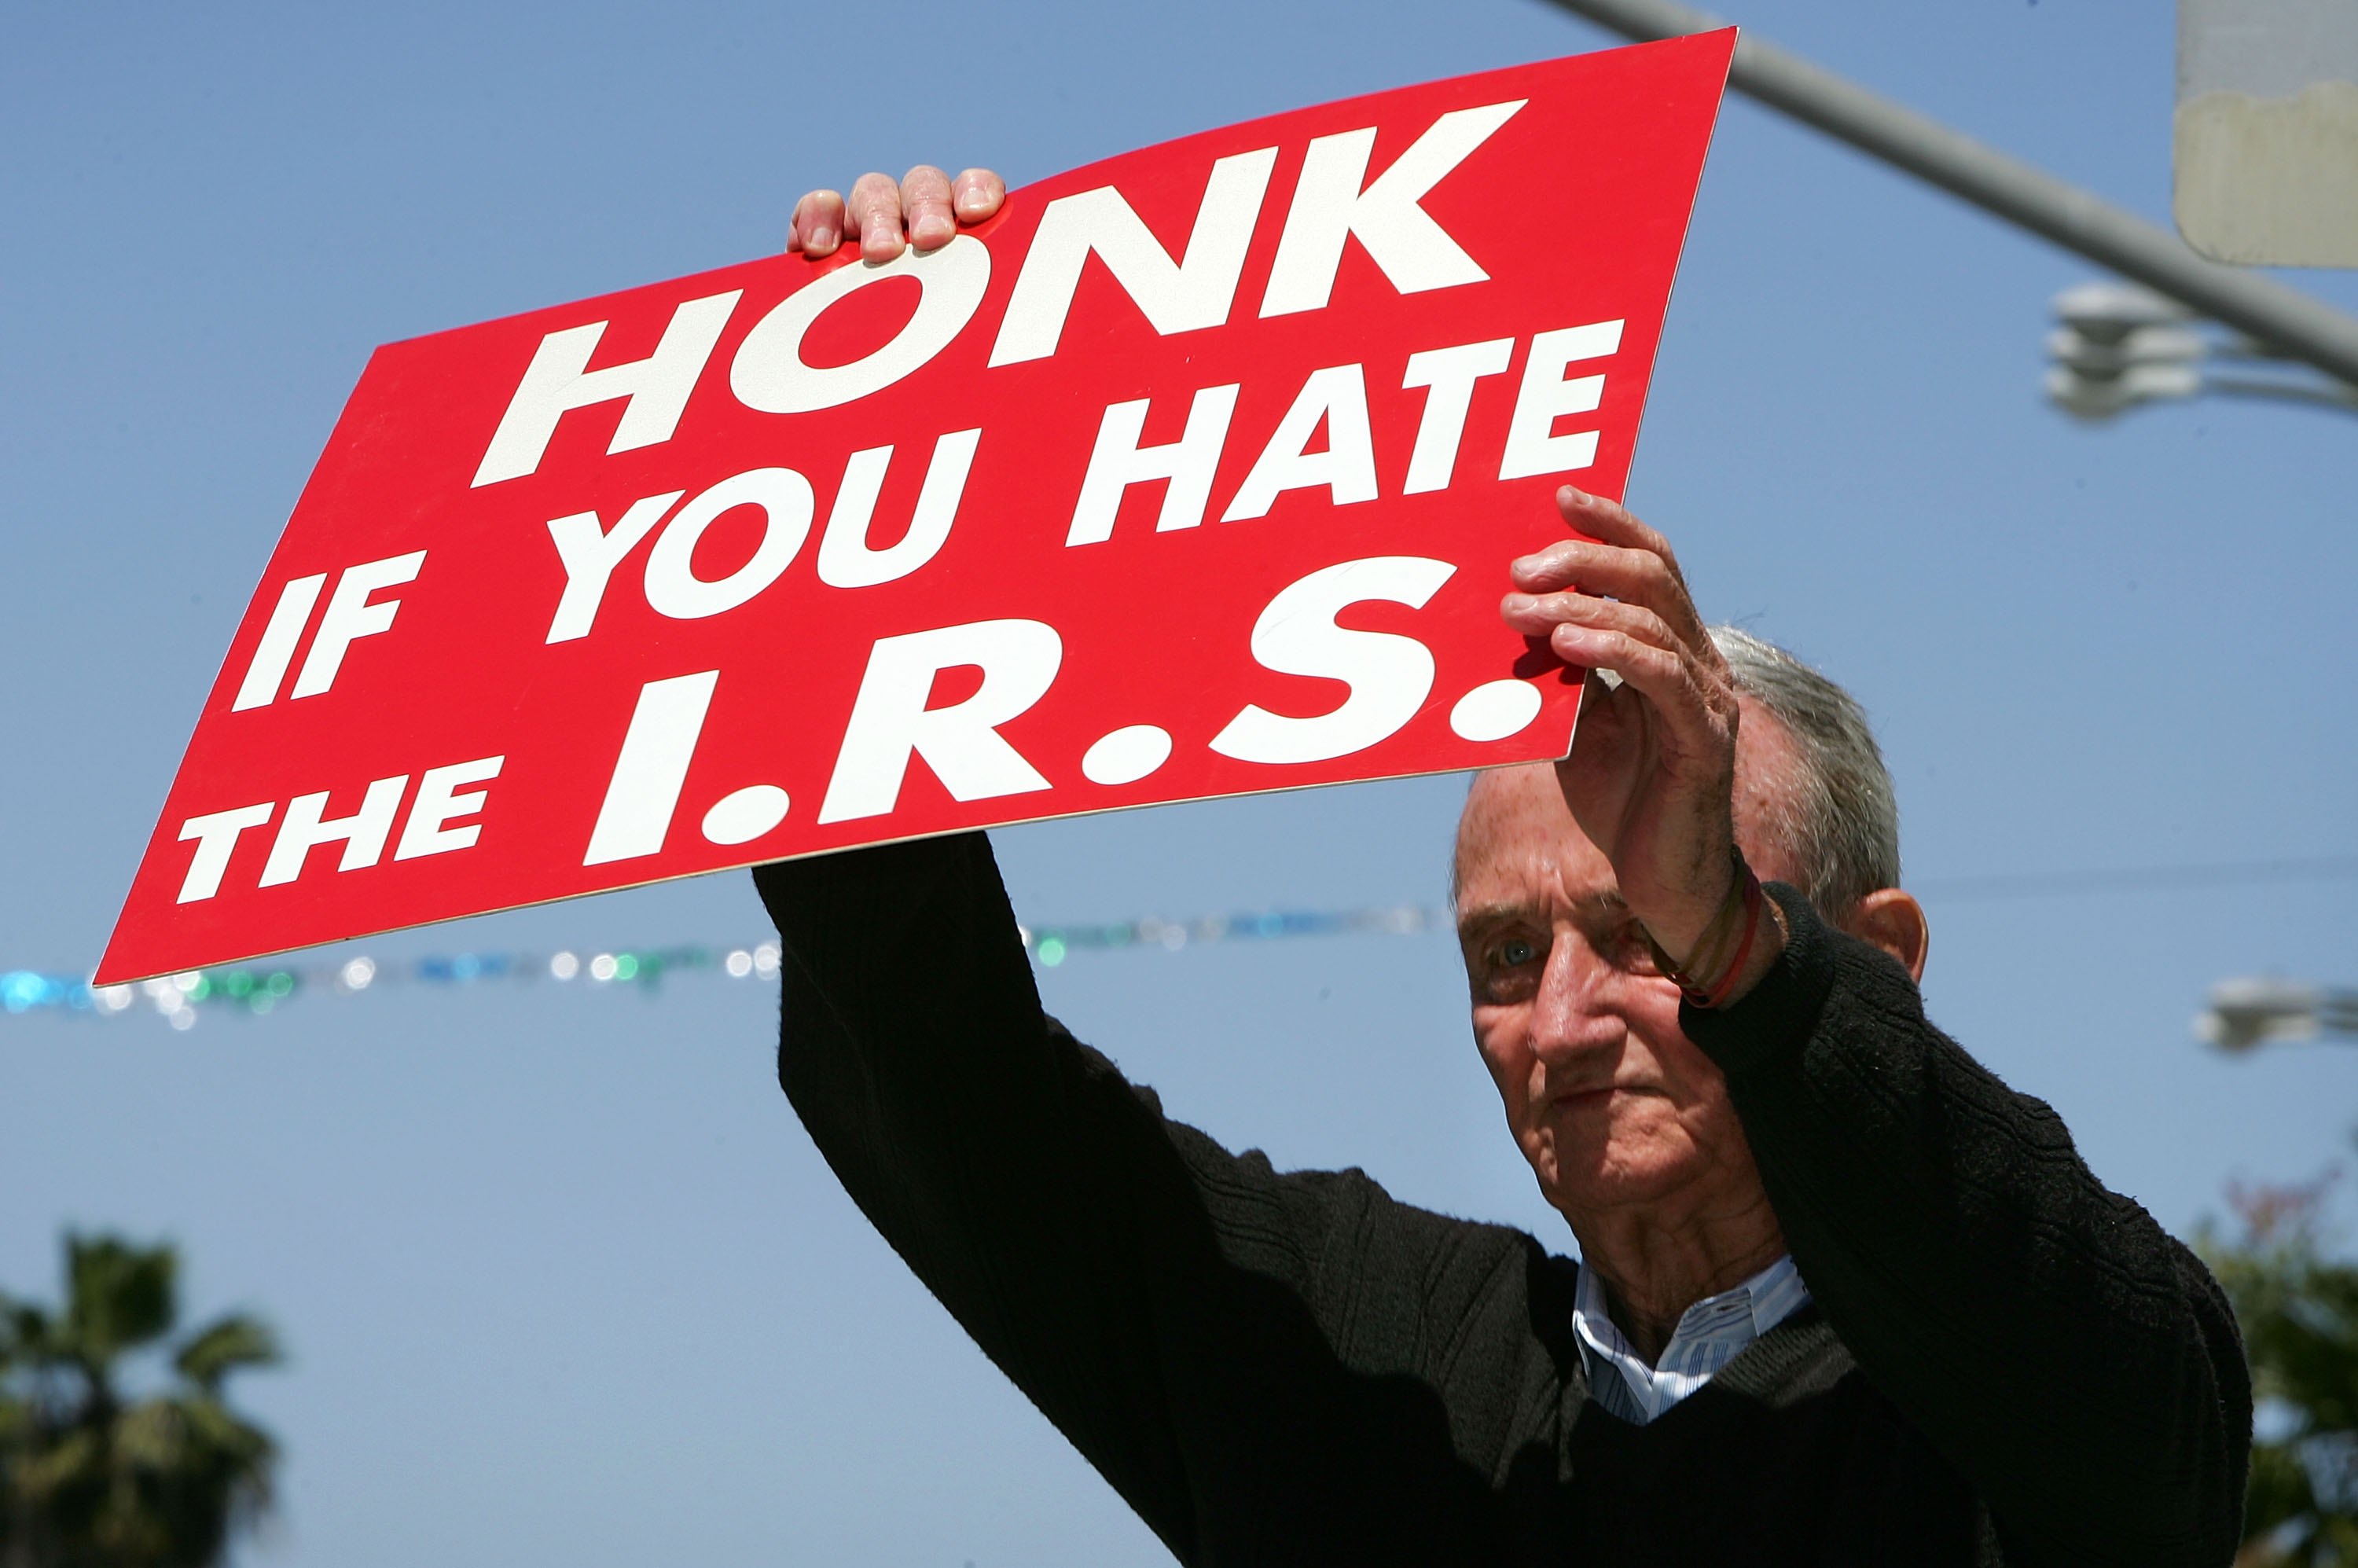 A man holds a sign that reads &quot;Honk if you hate the I.R.S.&quot;